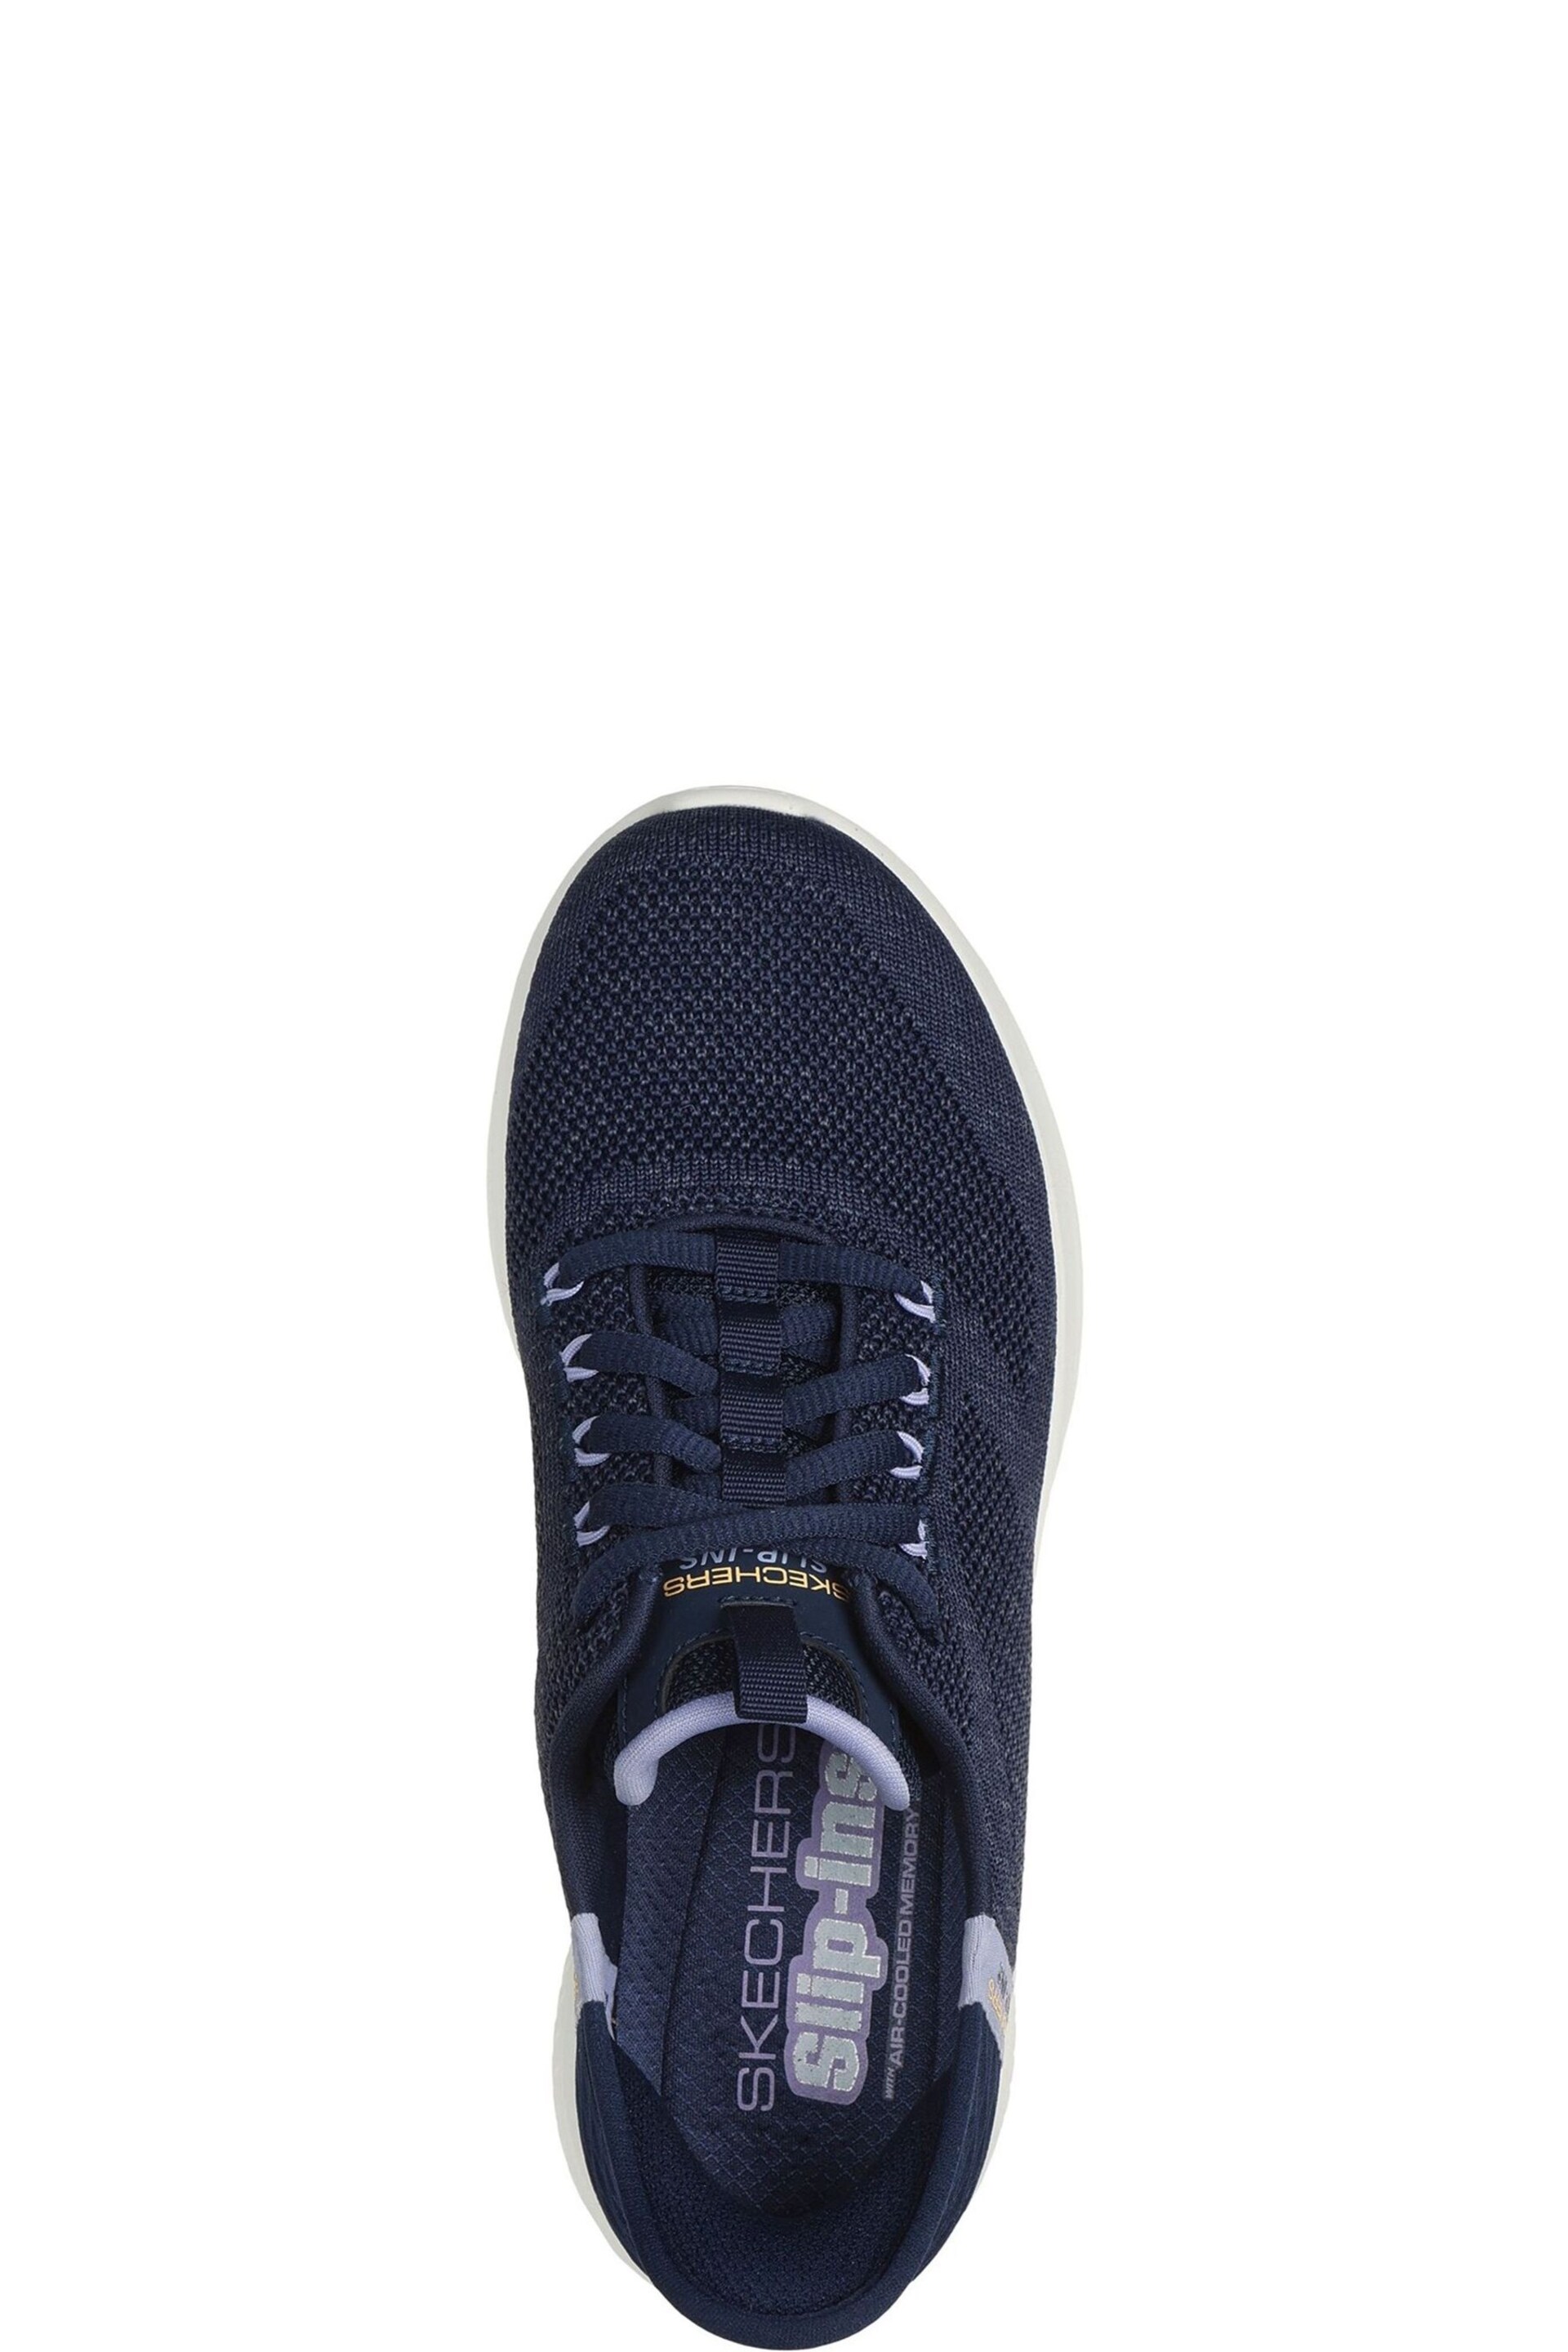 Skechers Blue Ultra Flex 3.0 Easy Step Trainers - Image 4 of 5